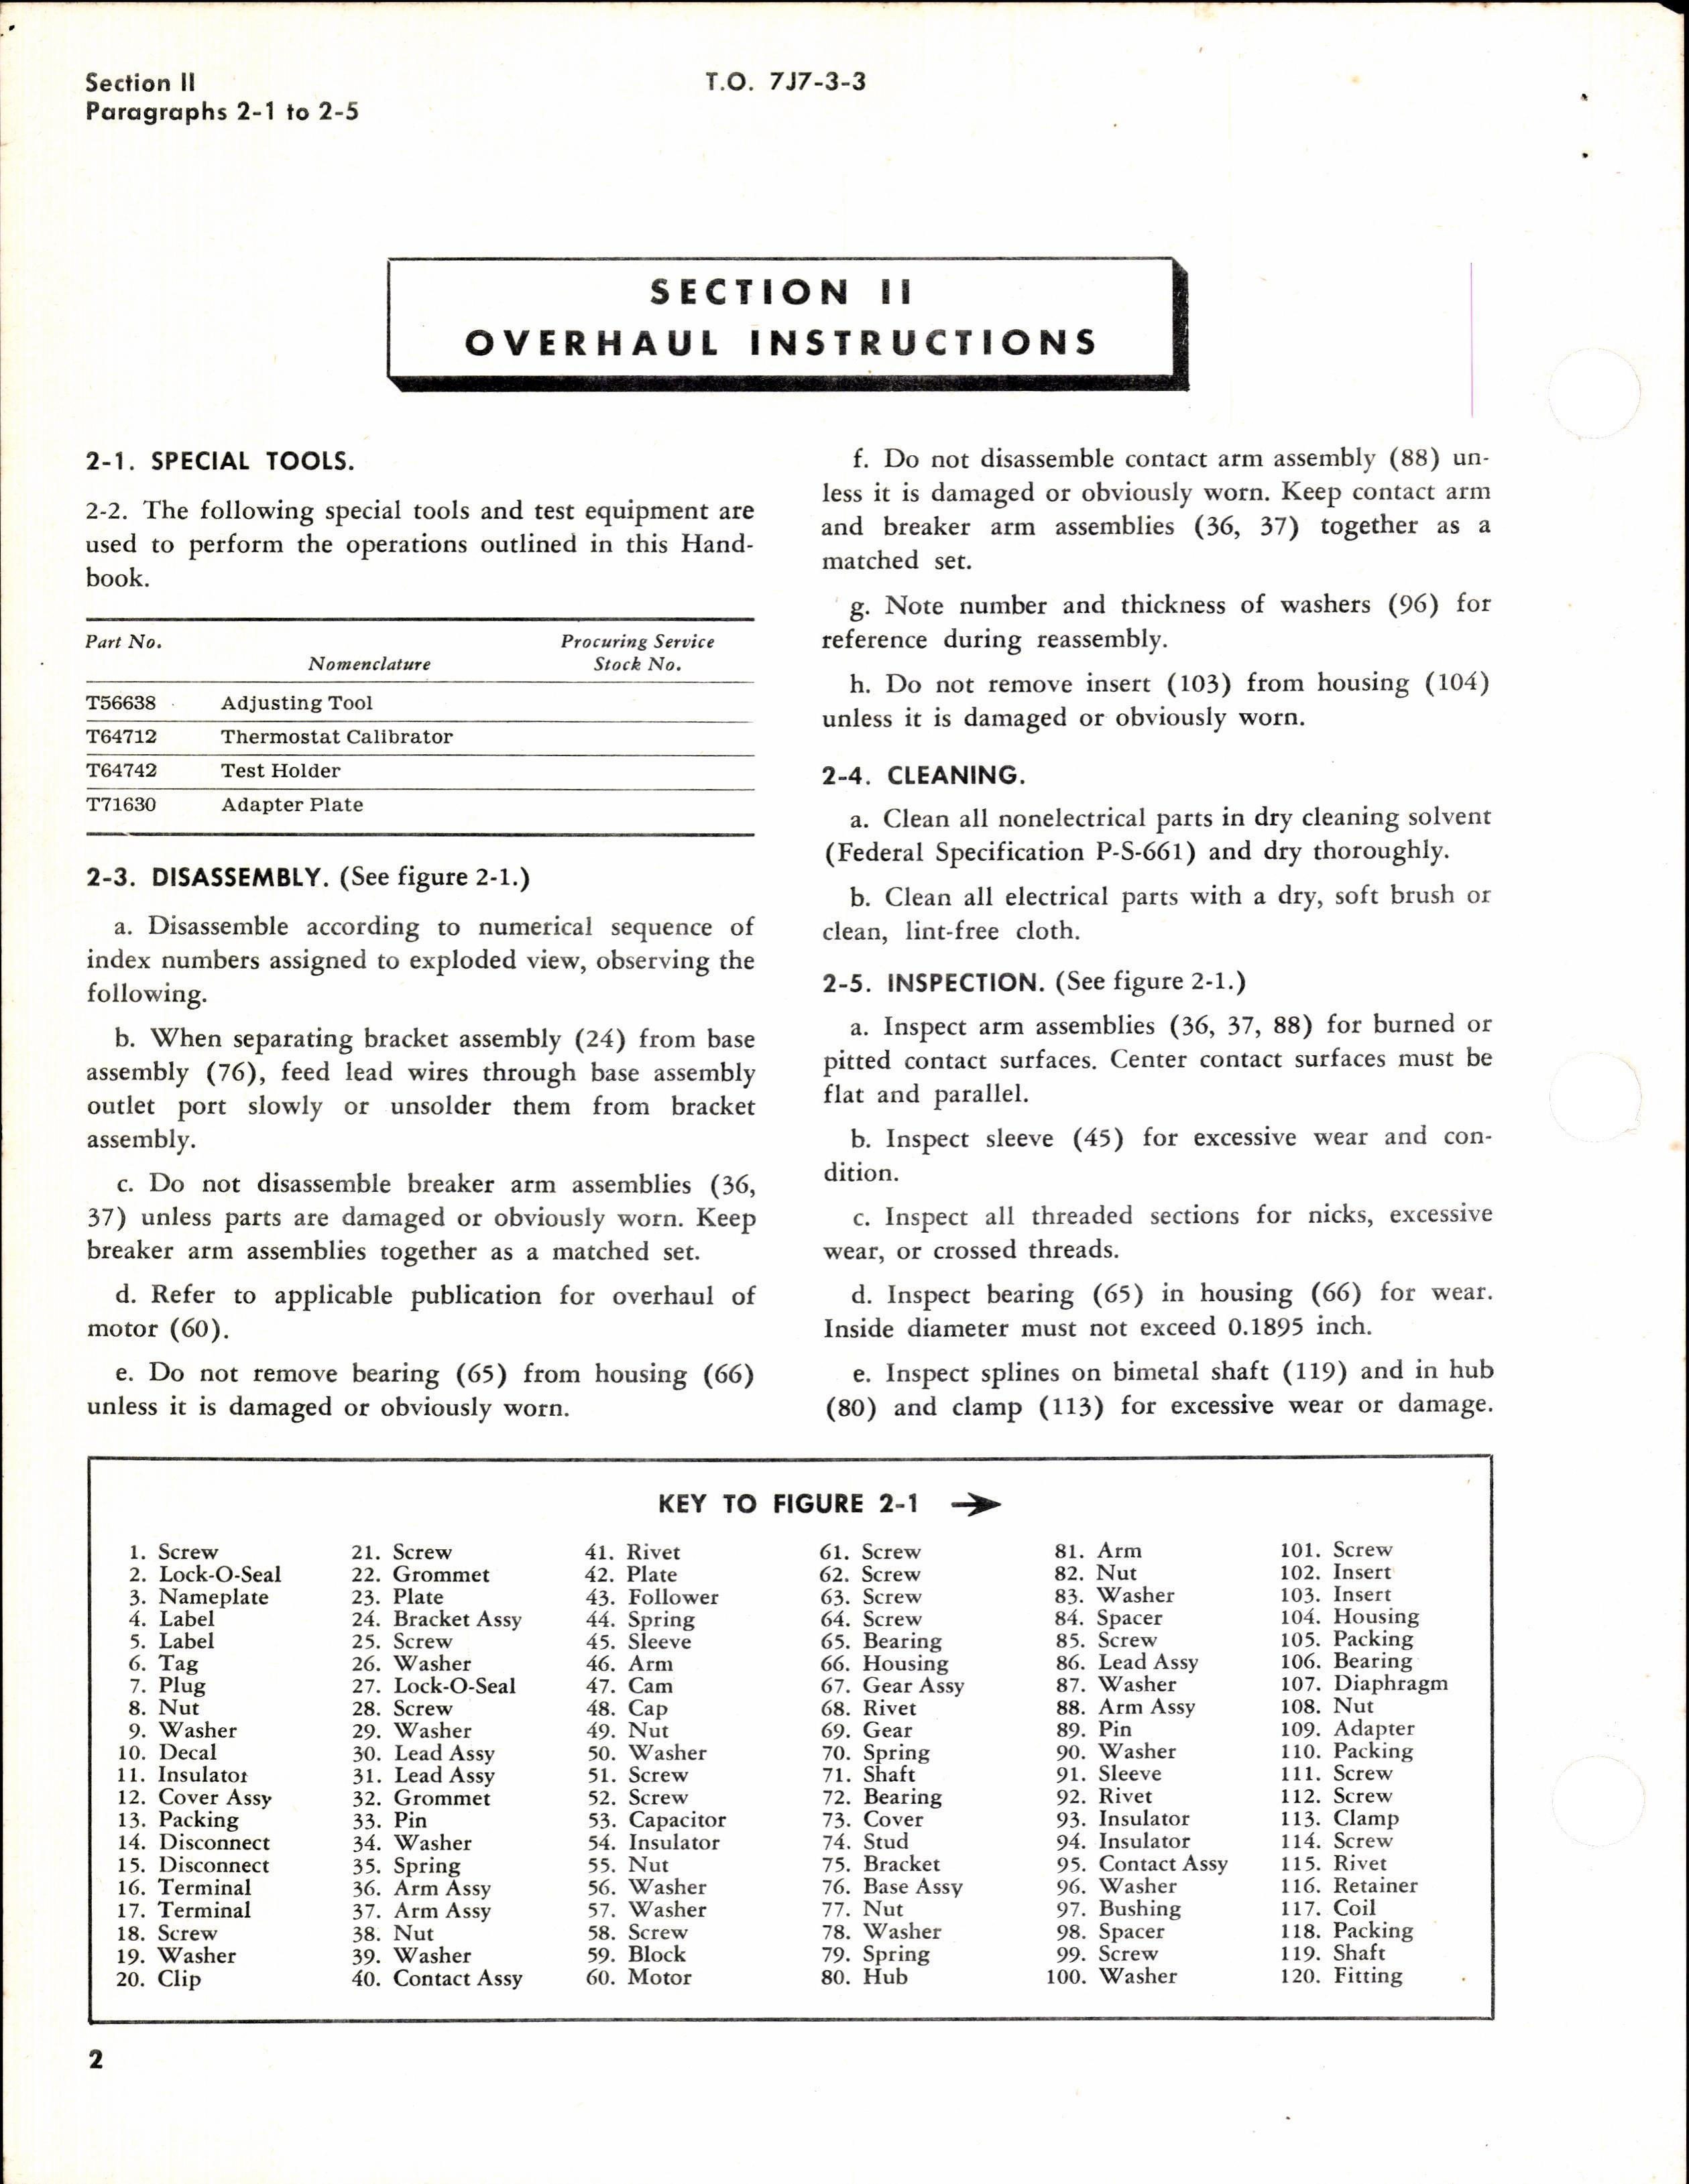 Sample page 4 from AirCorps Library document: Overhaul Instructions for Floating Control Oil Thermostat